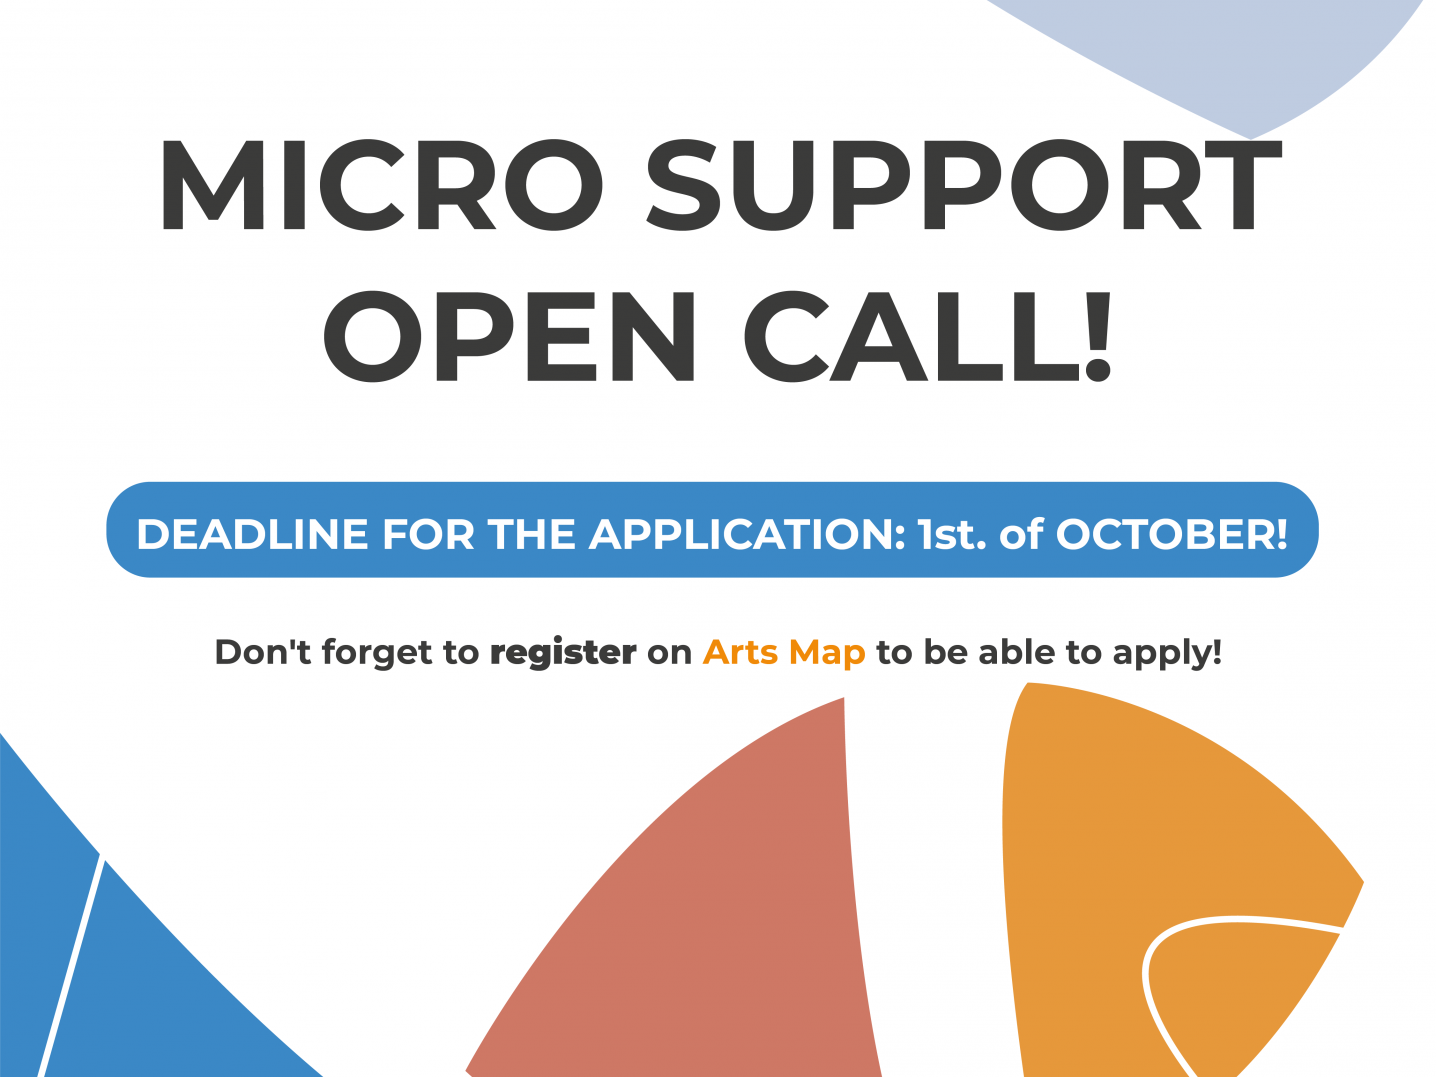 Micro support open call